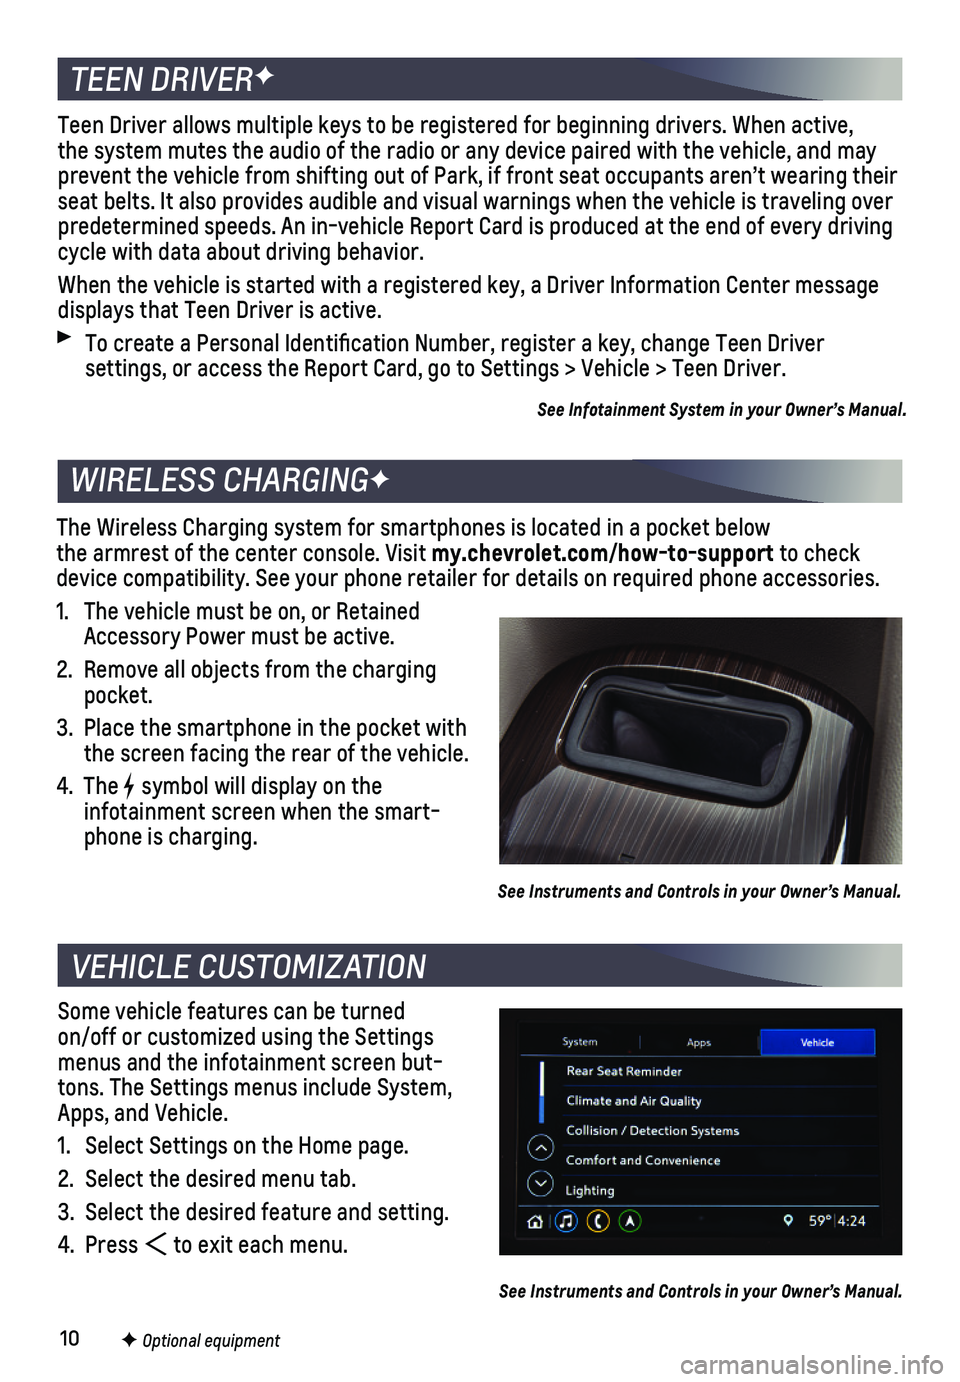 CHEVROLET MALIBU 2021  Get To Know Guide 10F Optional equipment 
Some vehicle features can be turned  on/off or customized using the Settings menus and the infotainment screen but-tons. The Settings menus include System, Apps, and Vehicle.
1